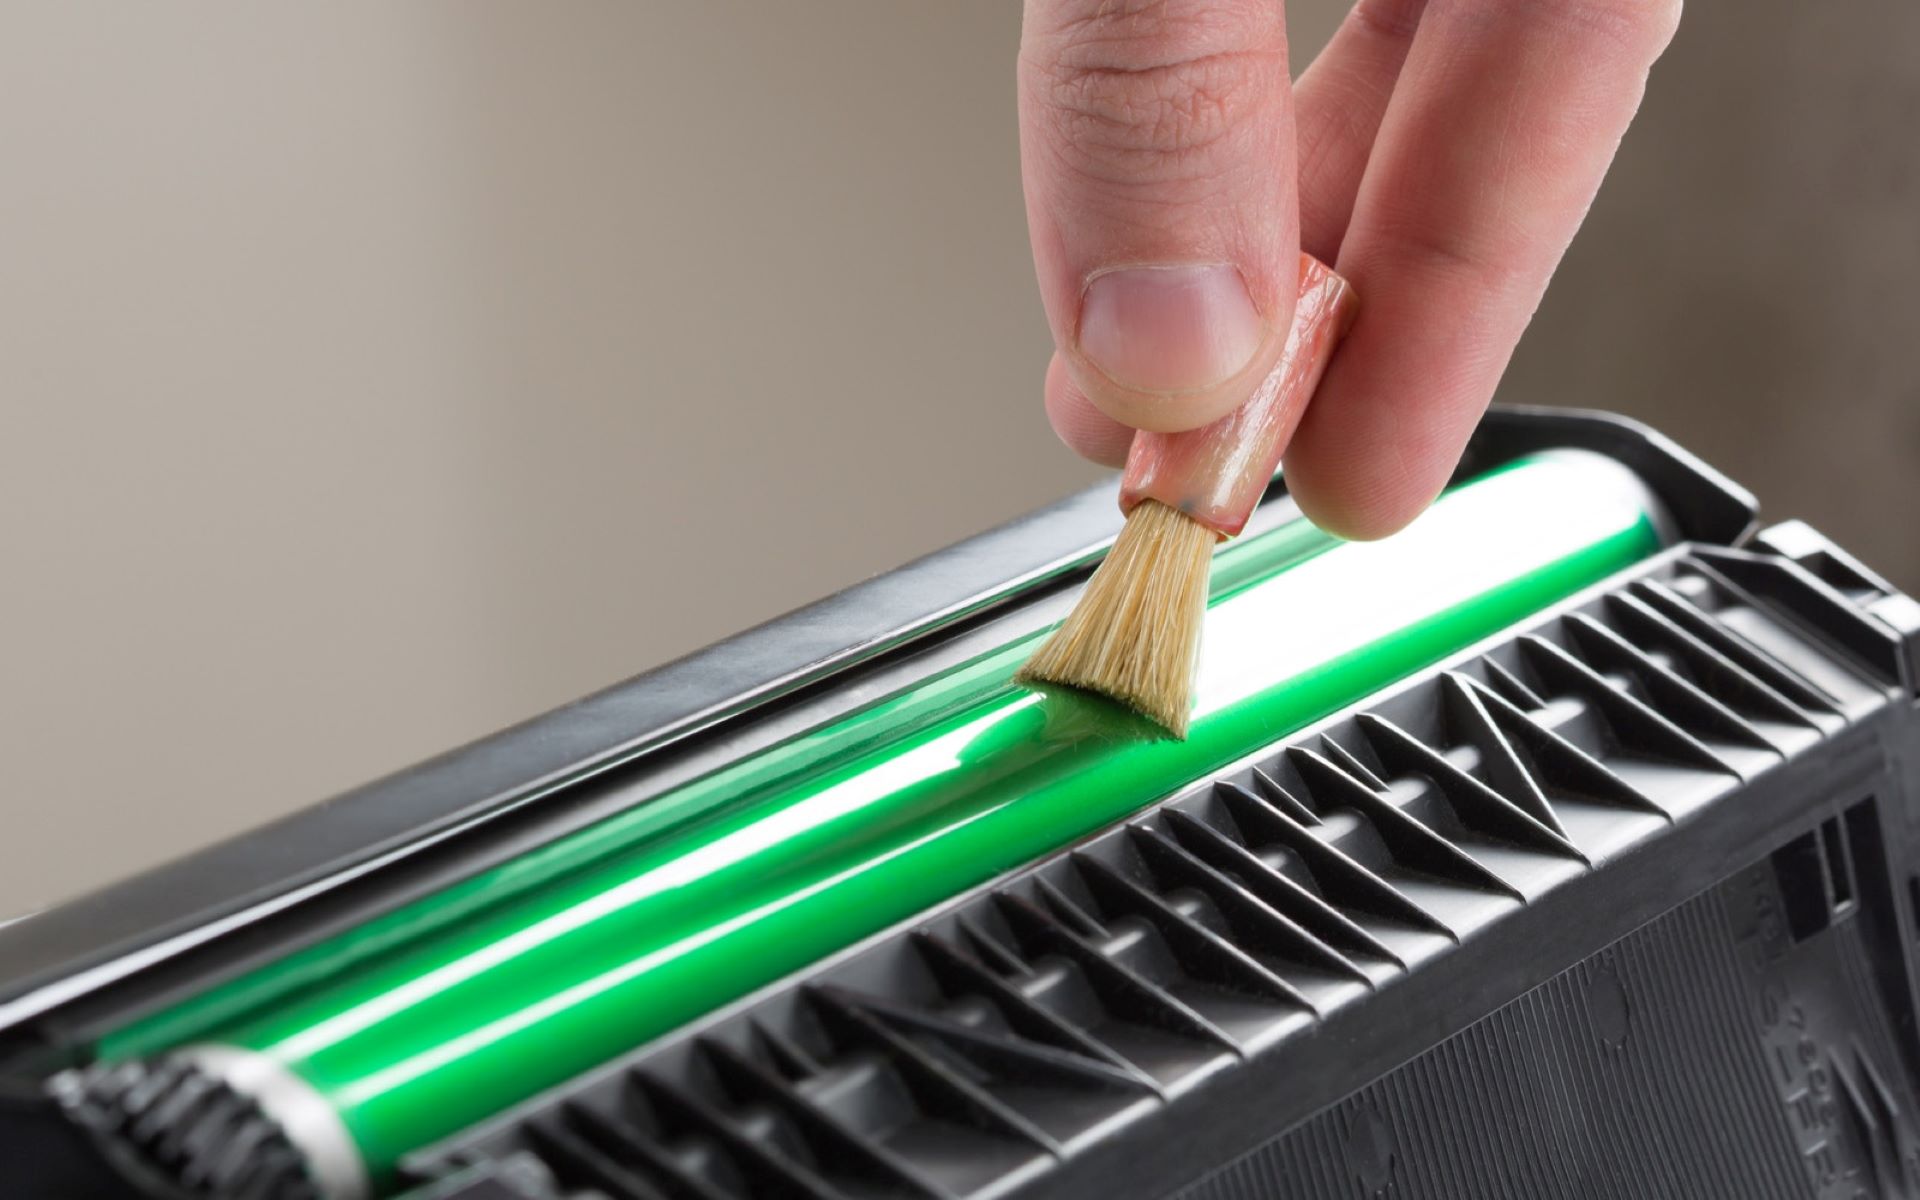 How To Clean A Laser Printer